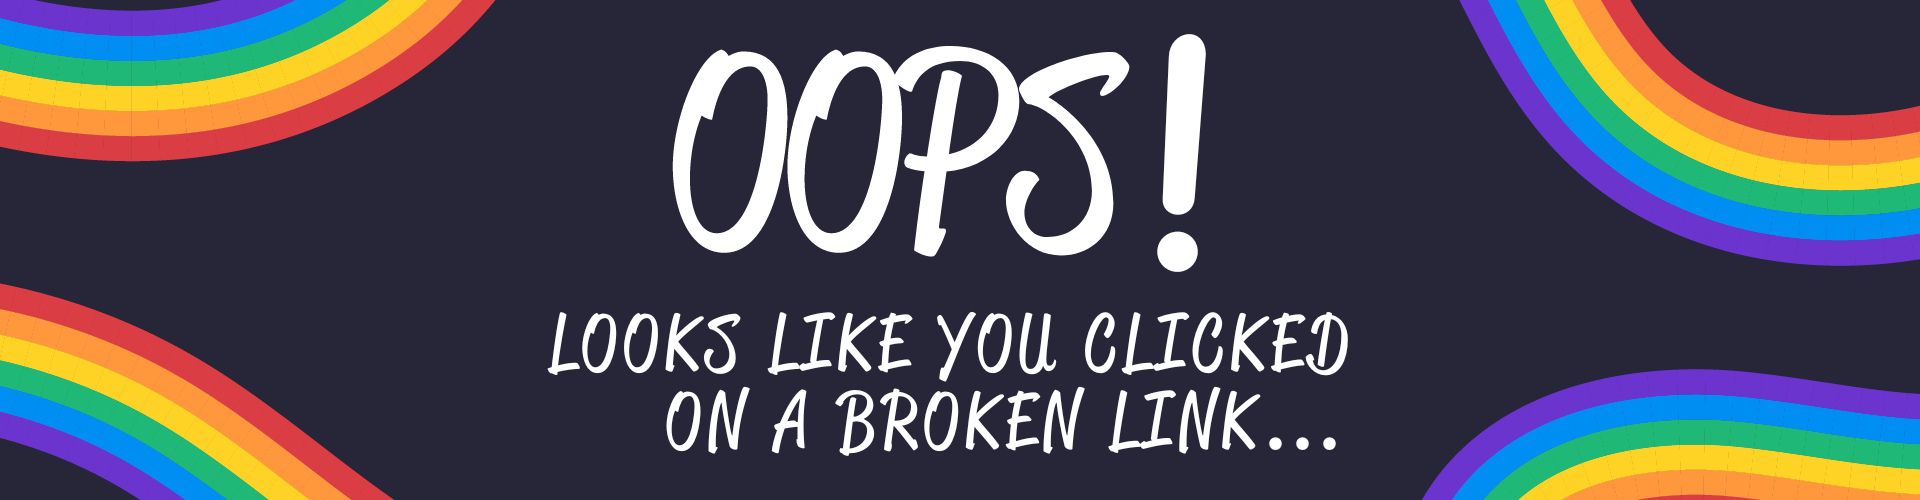 Oops! Looks like you clicked on a broken link...